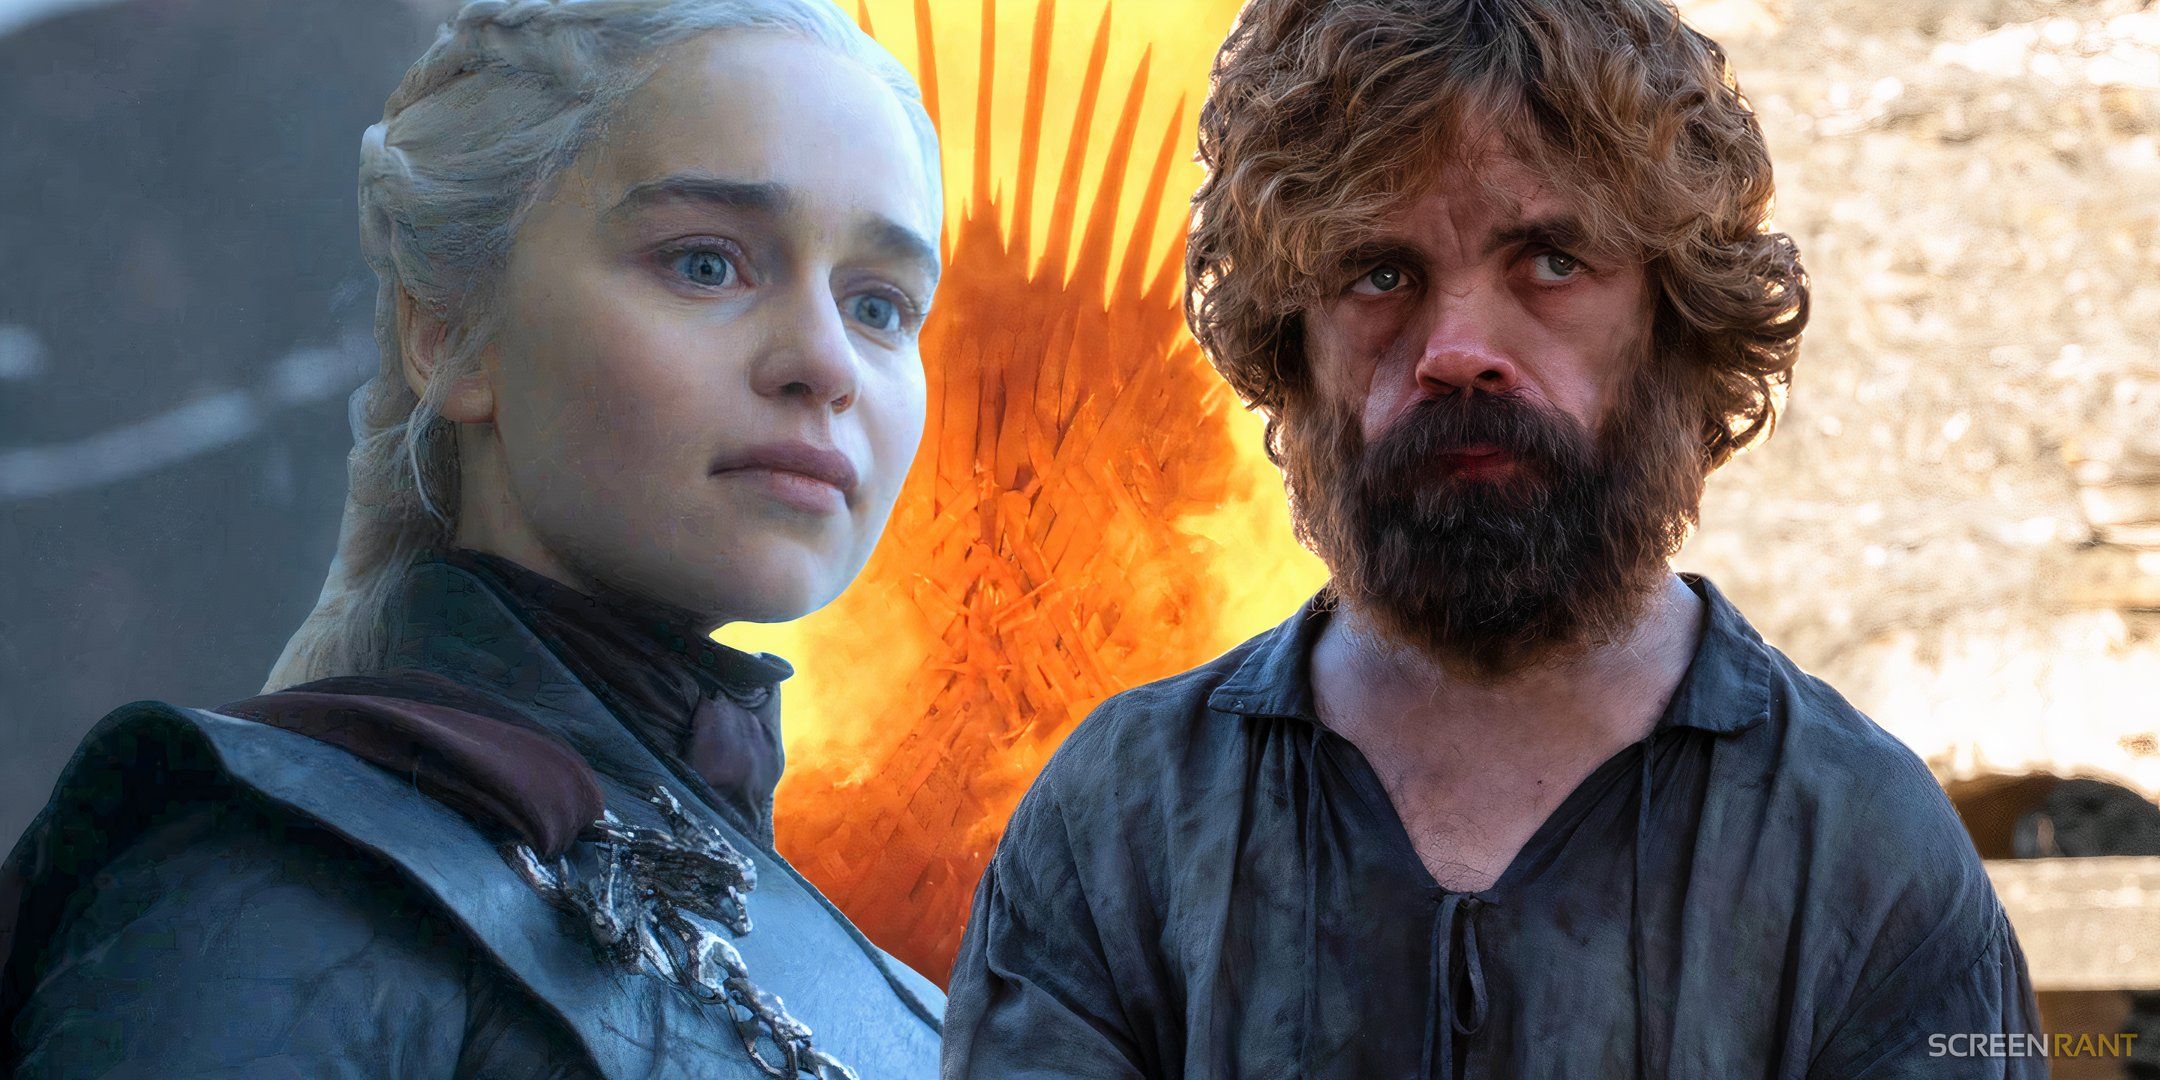 Daenerys looking angry and sad, the Iron Throne burning, and Tyrion in chains in Game of Thrones' series finale